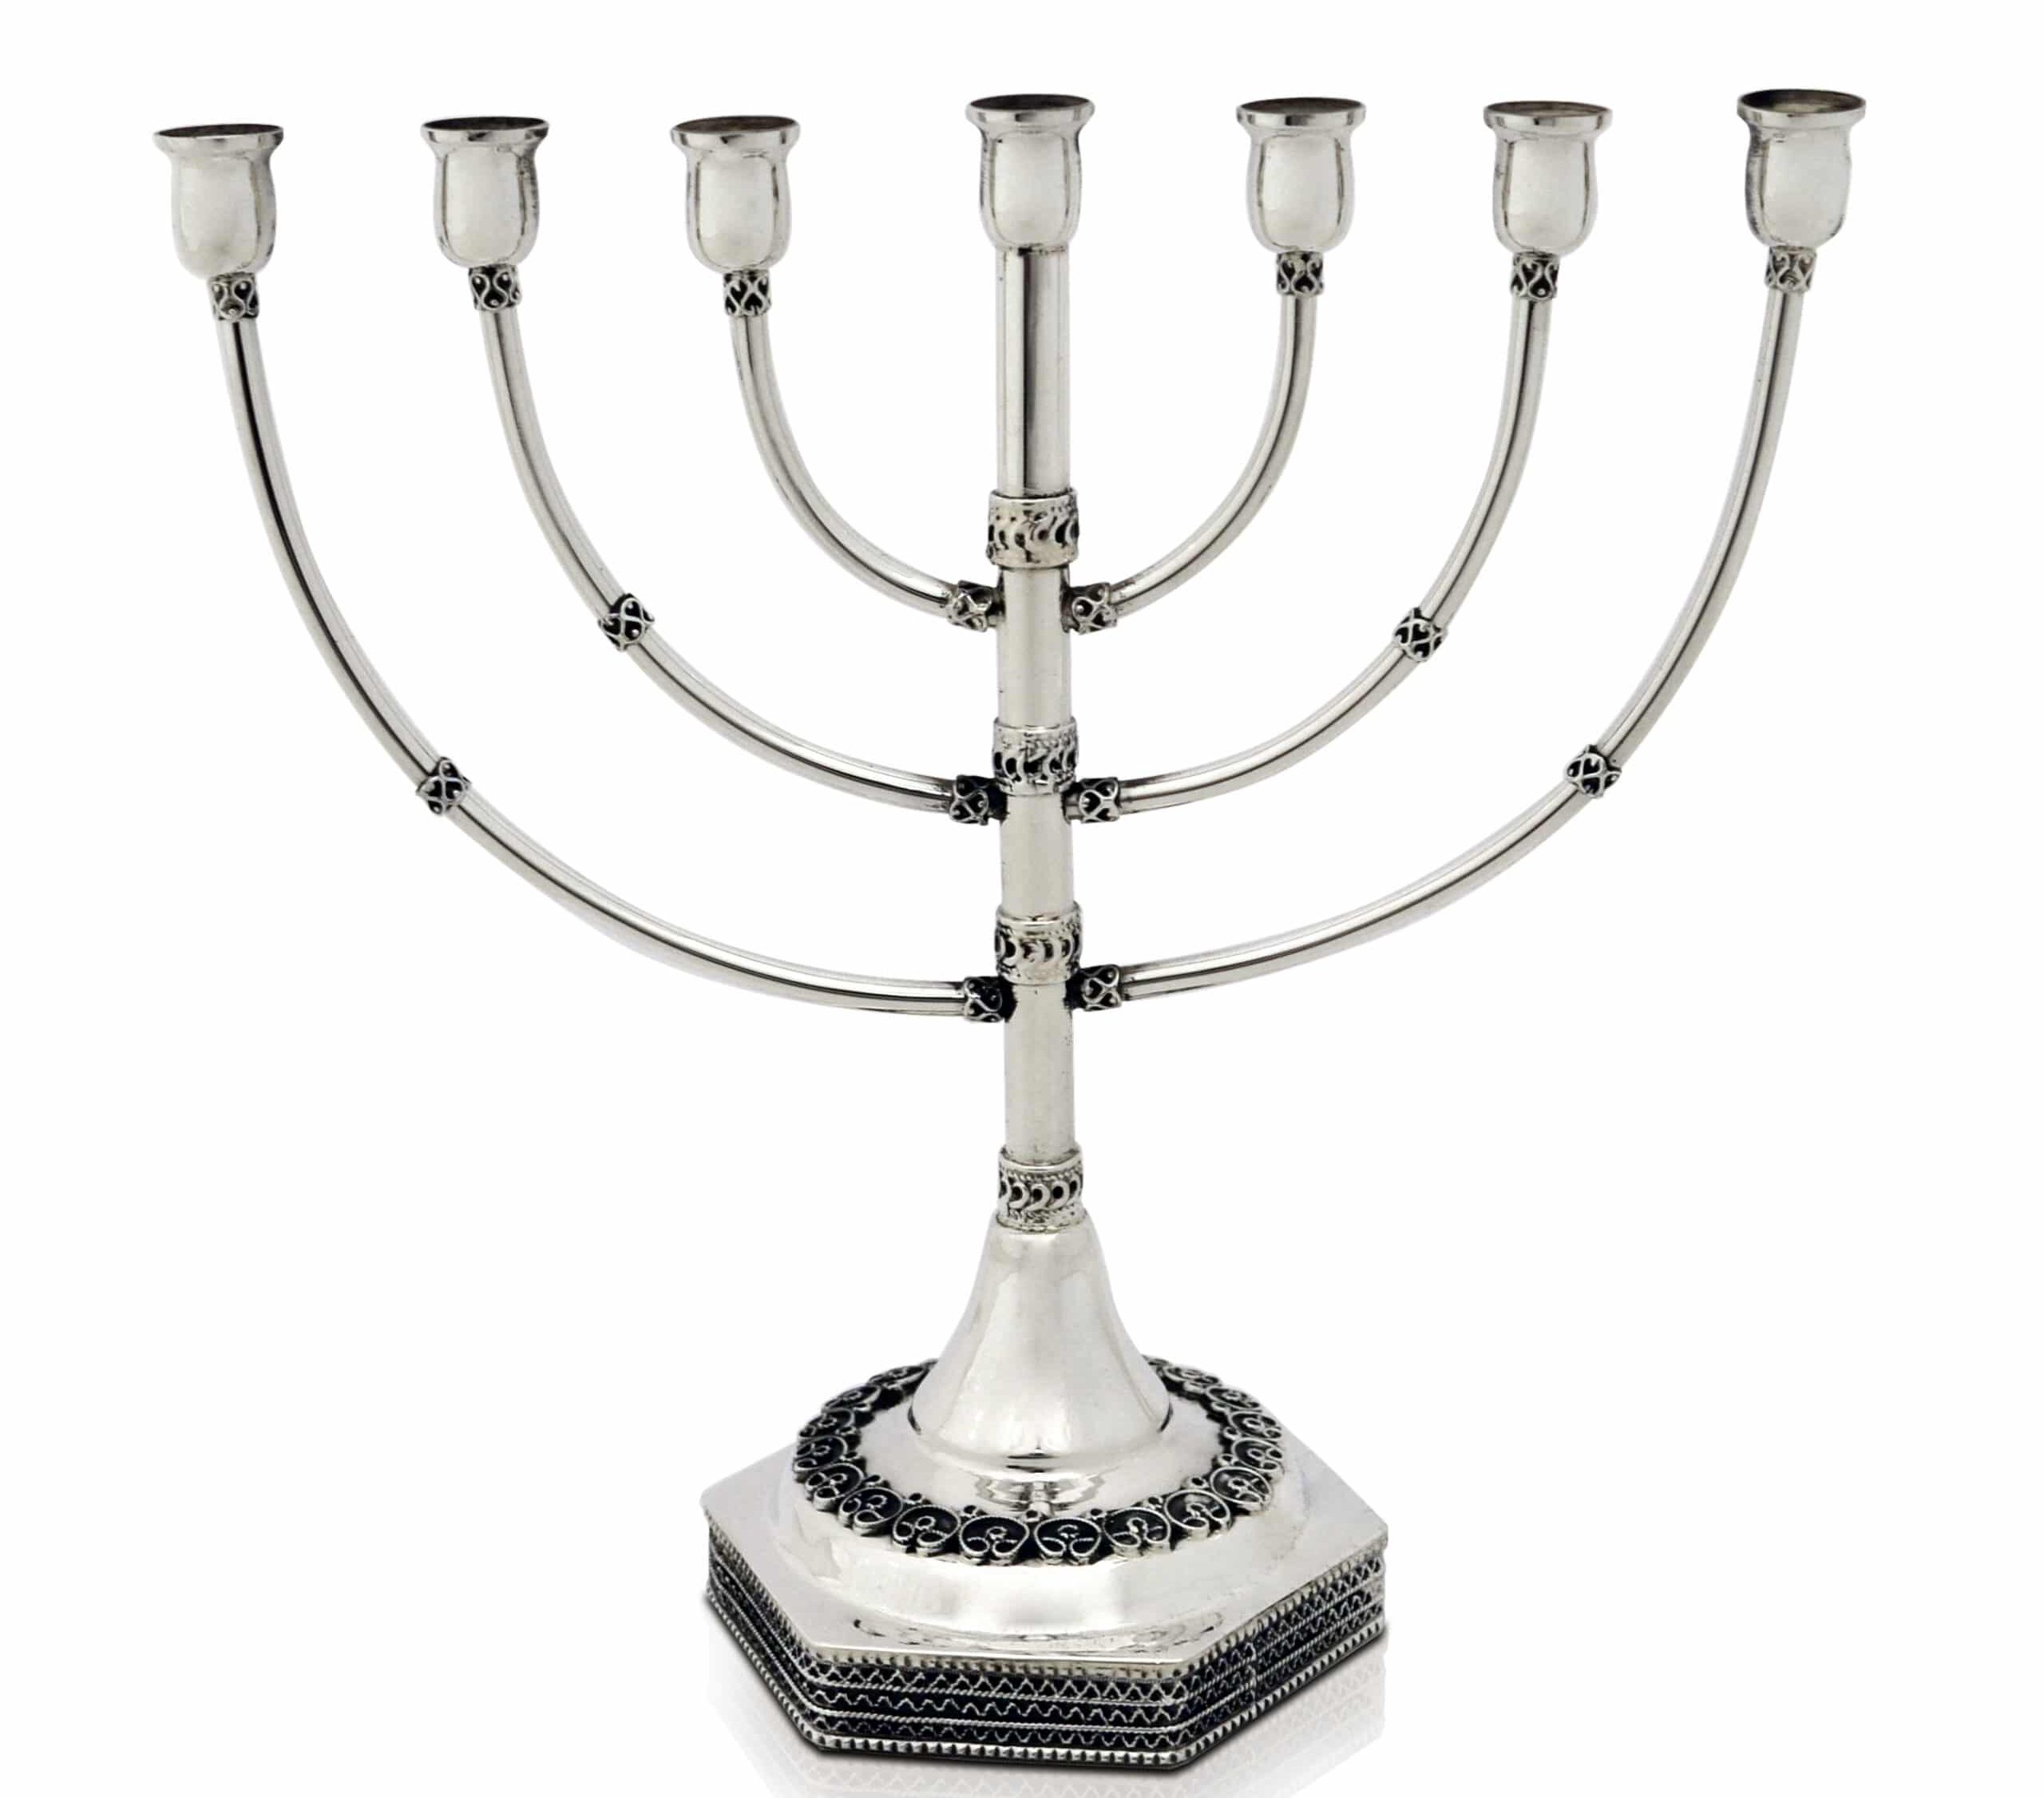 Seven Branches Menorah with Filigree Patterns